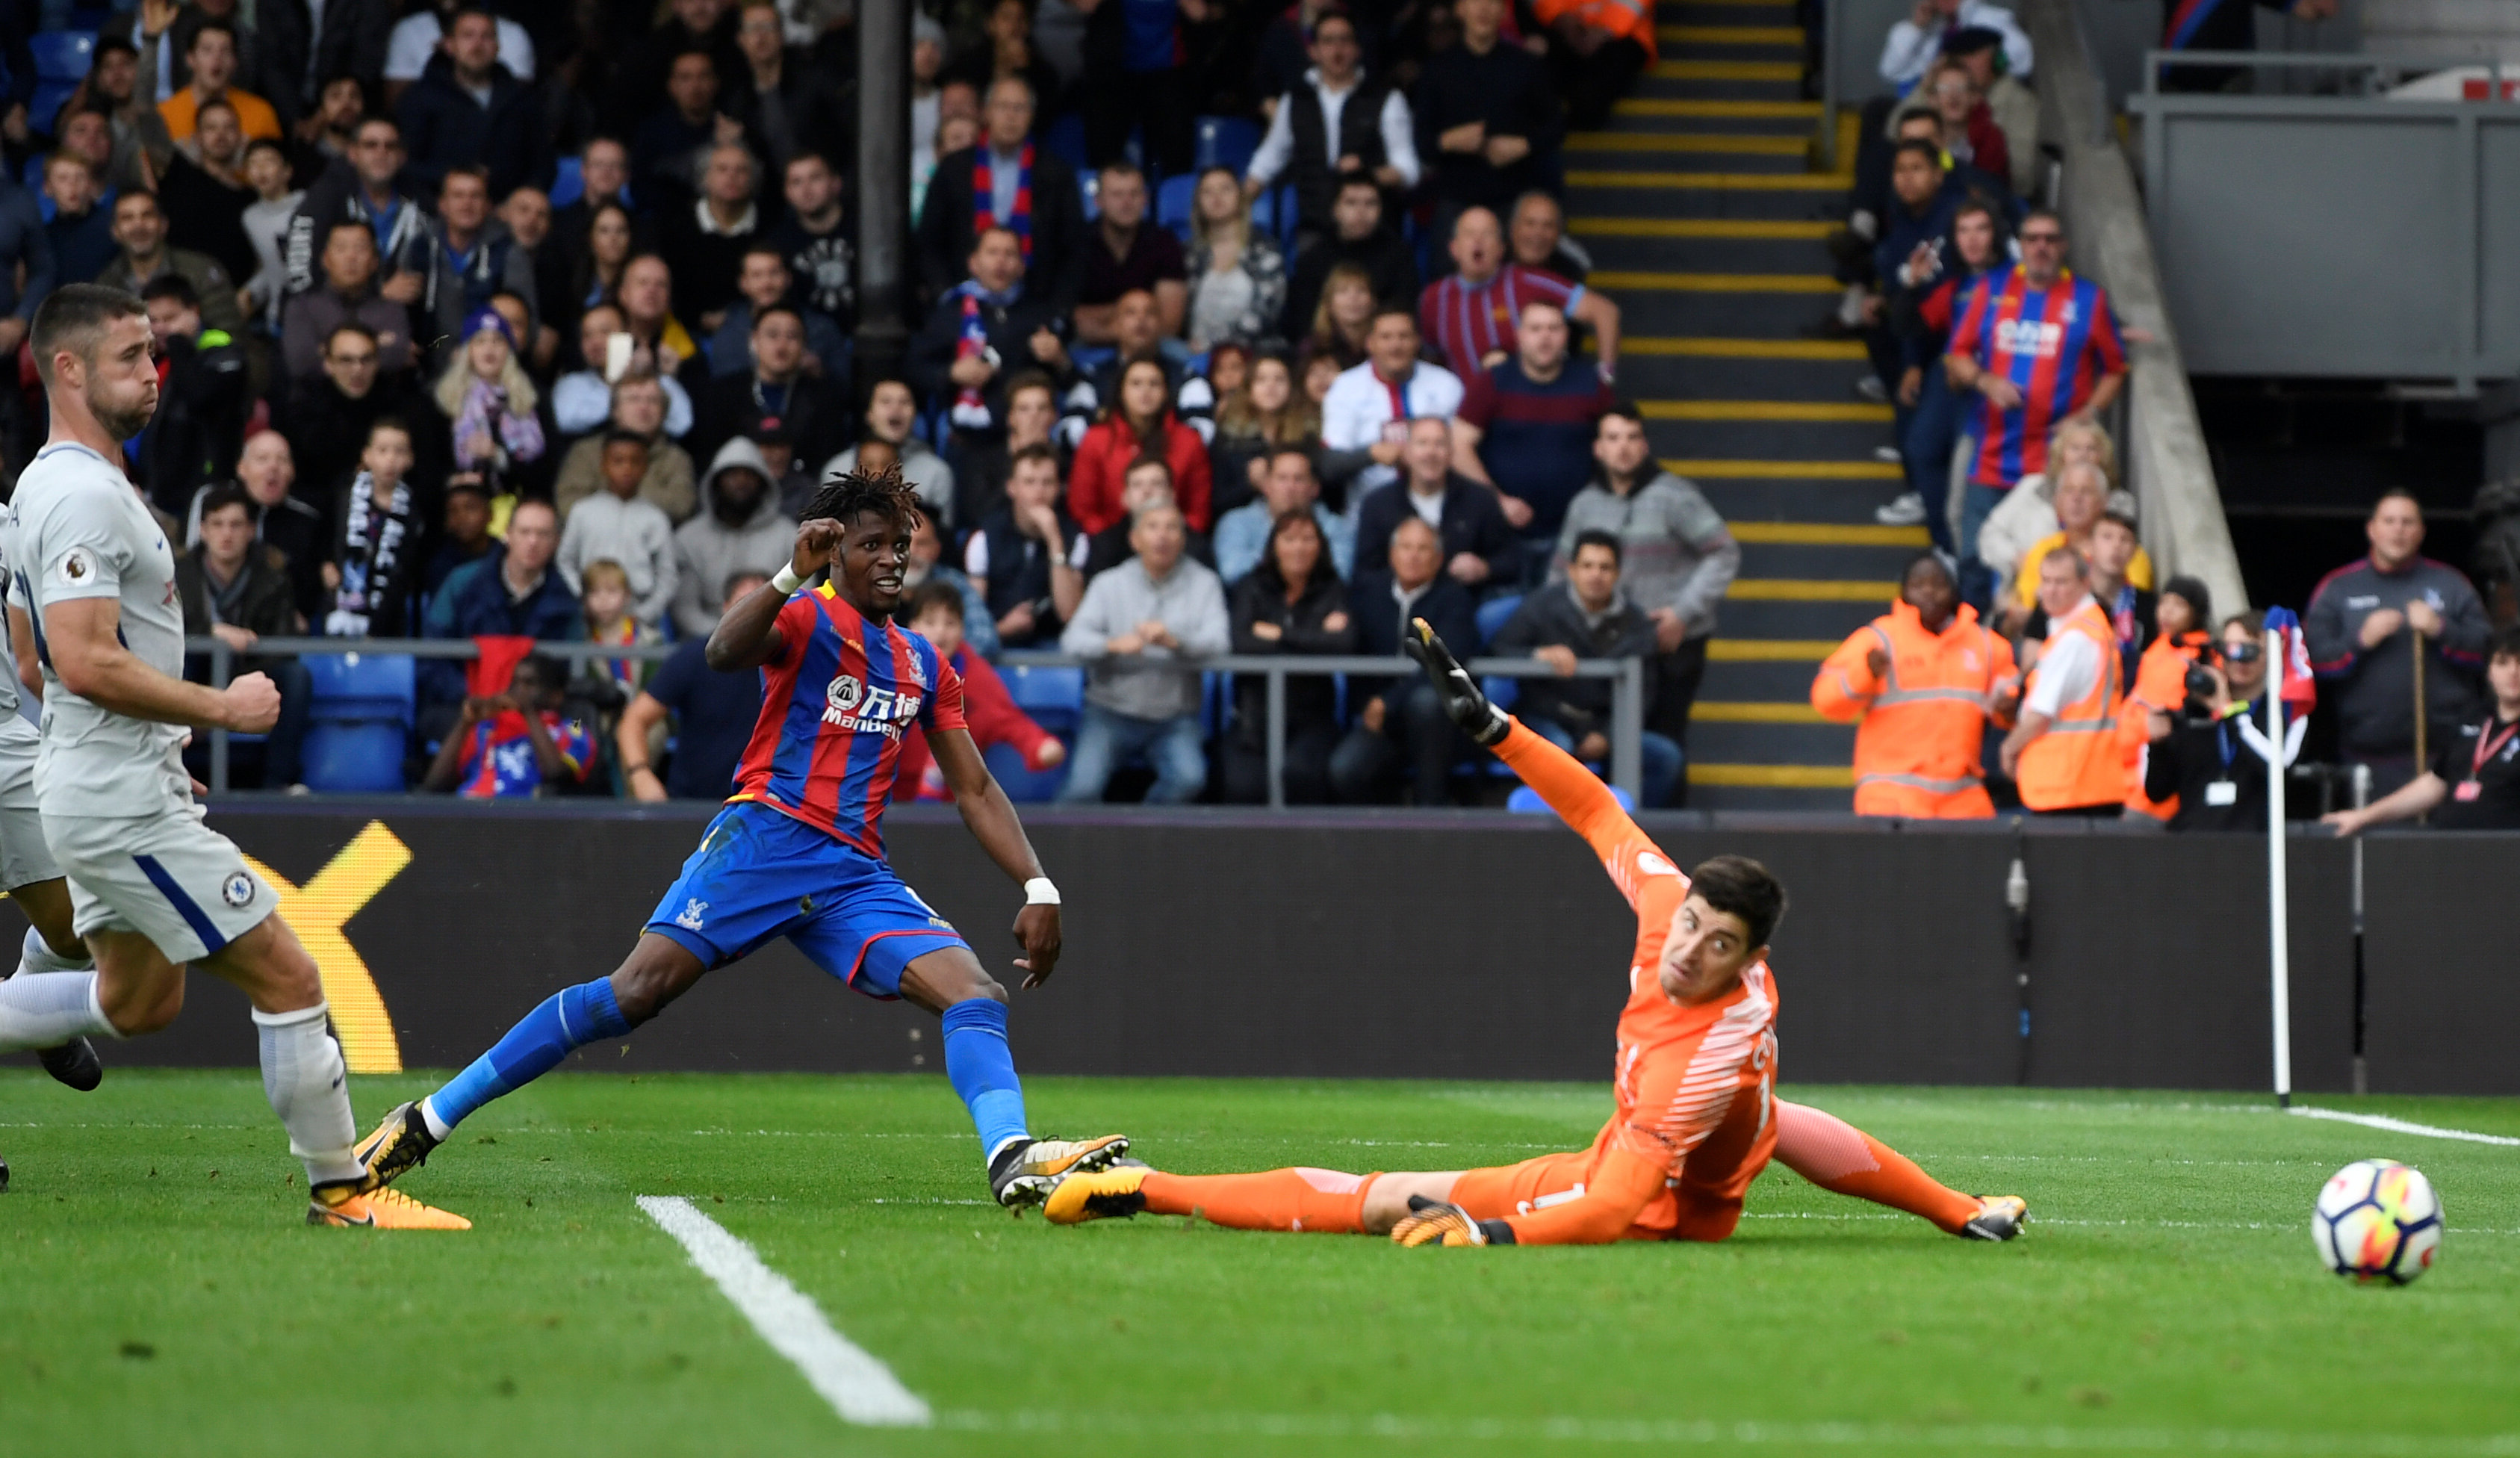 Football: Zaha gives Palace first victory as Chelsea lose again